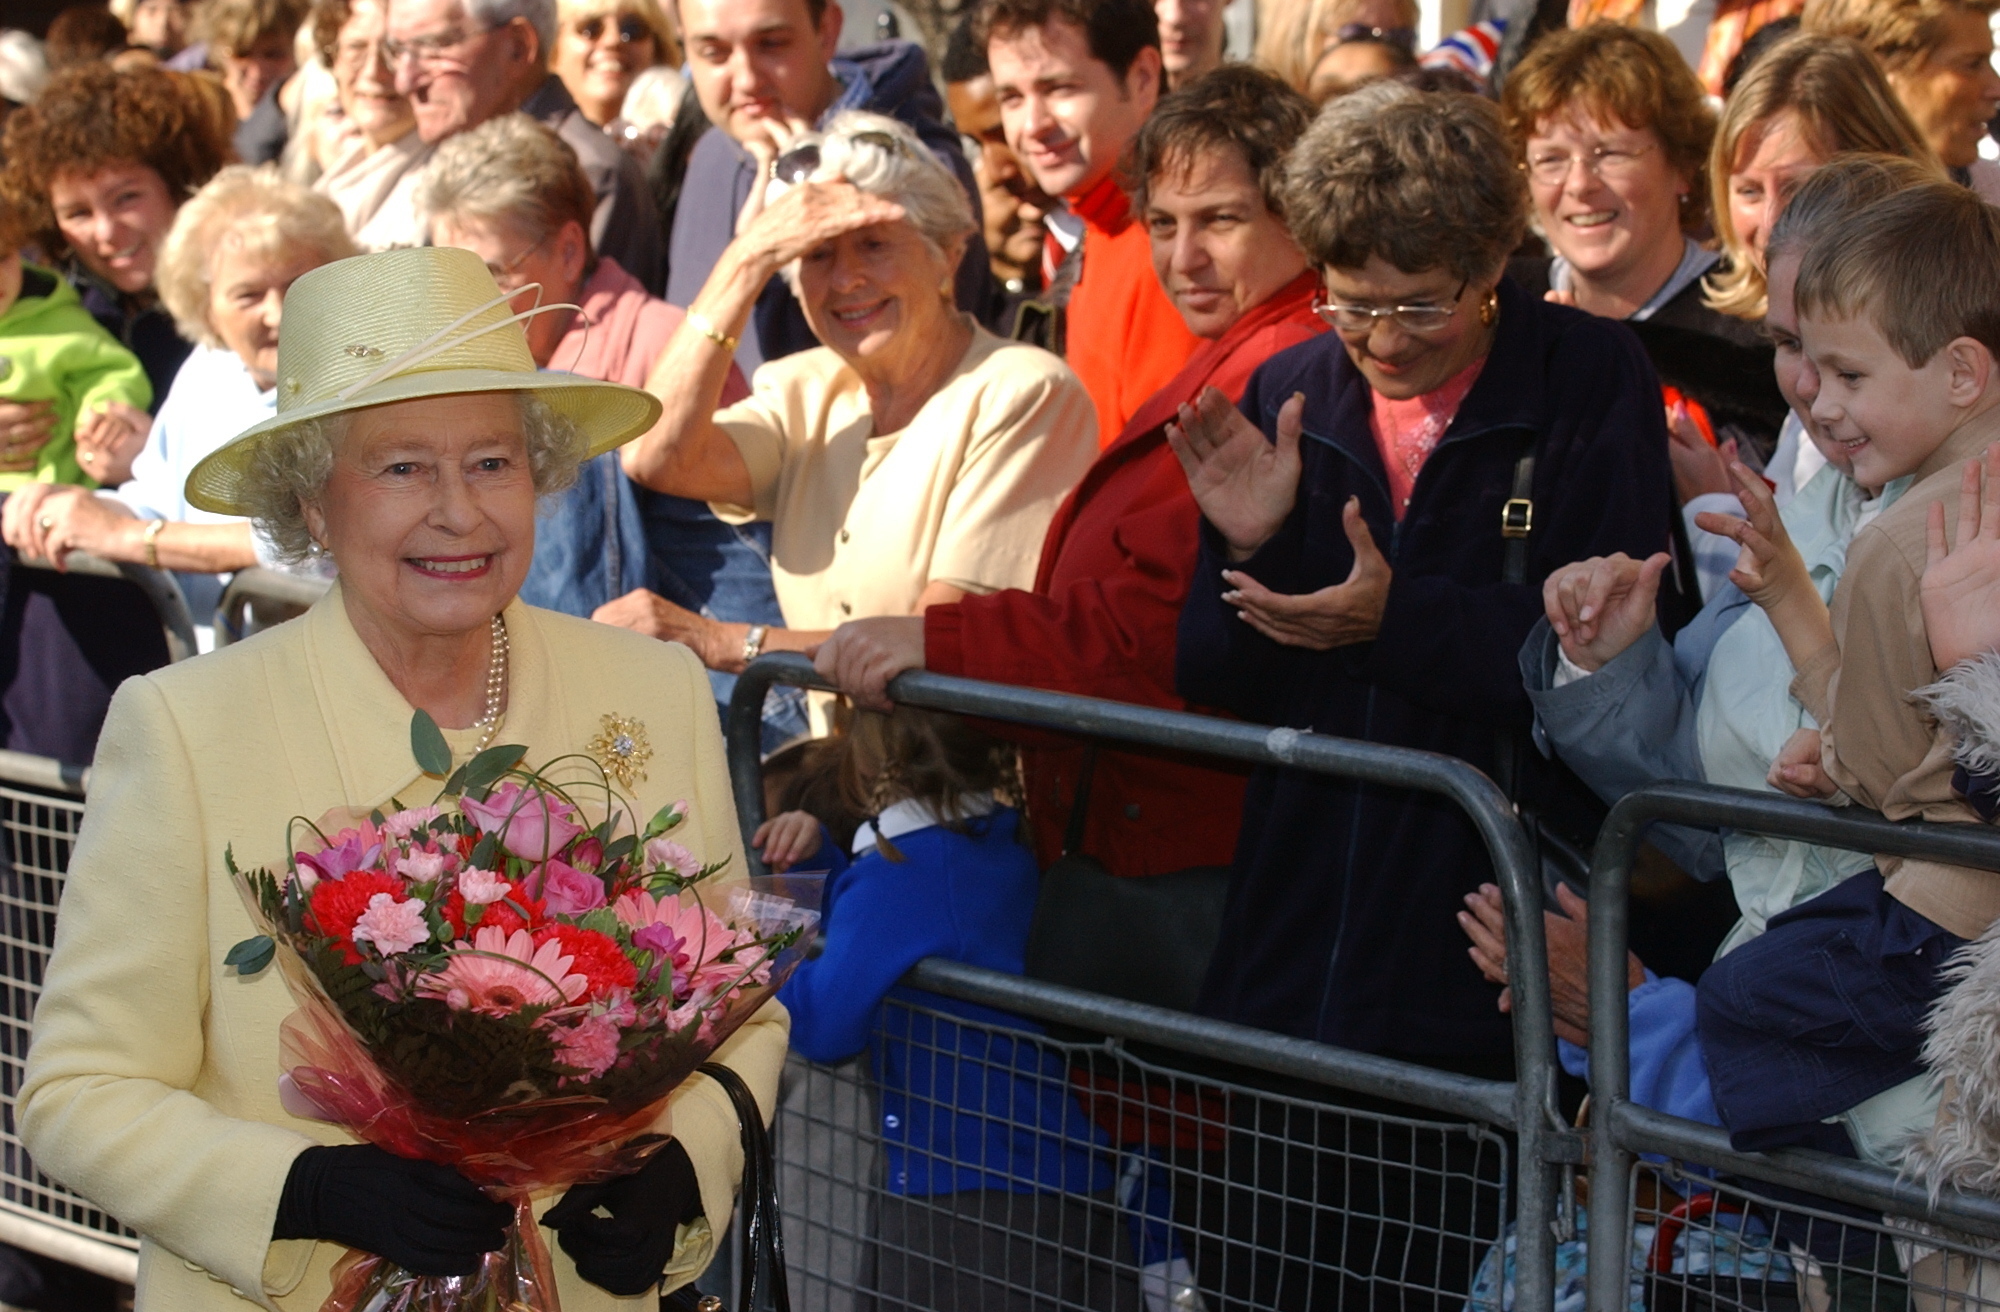 Her Majesty Queen Elizabeth II visits Enfield (Credit Enfield Council)